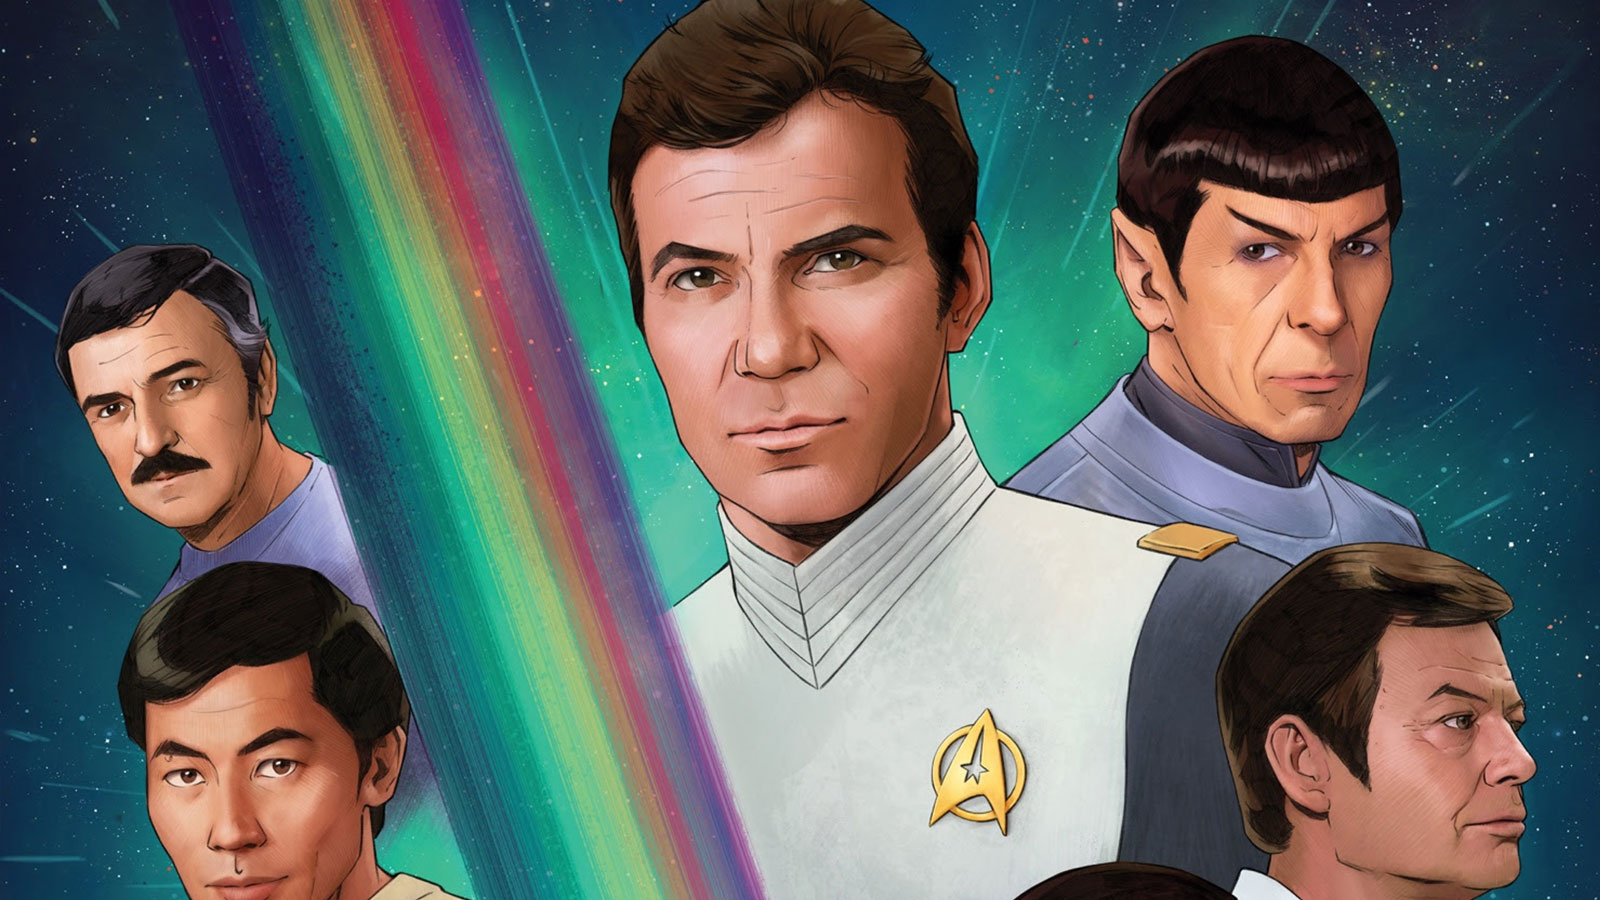 The events of Star Trek: The Motion Picture to continue in new IDW comic miniseries “Echoes”